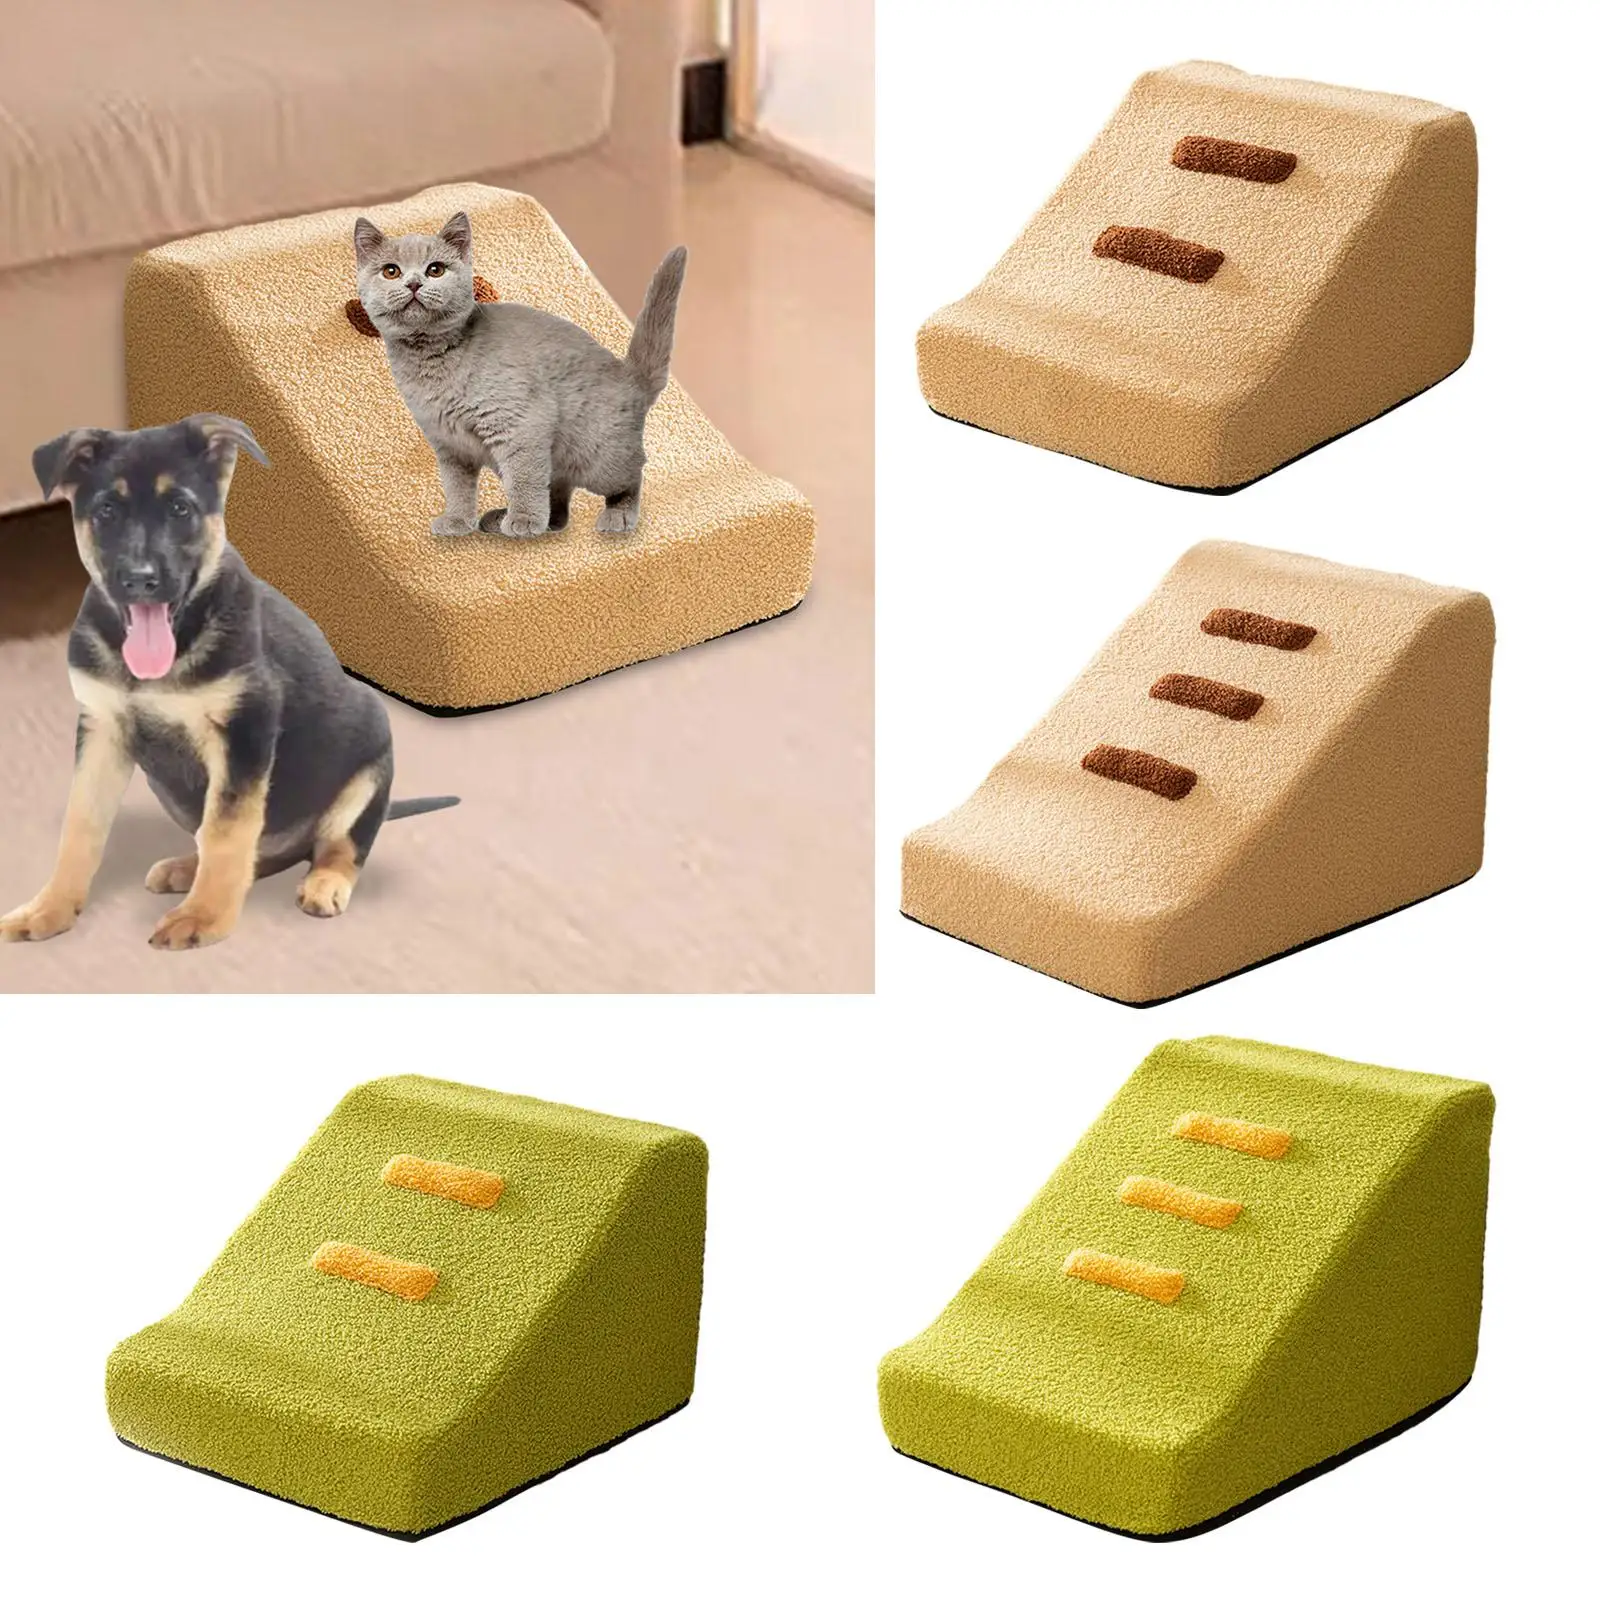 Dog Stairs Ramp Soft Portable Convenient Machine Washable Cover Durable for Bed Couch Sofa Chair Non Slip Versatile Dog Ladder